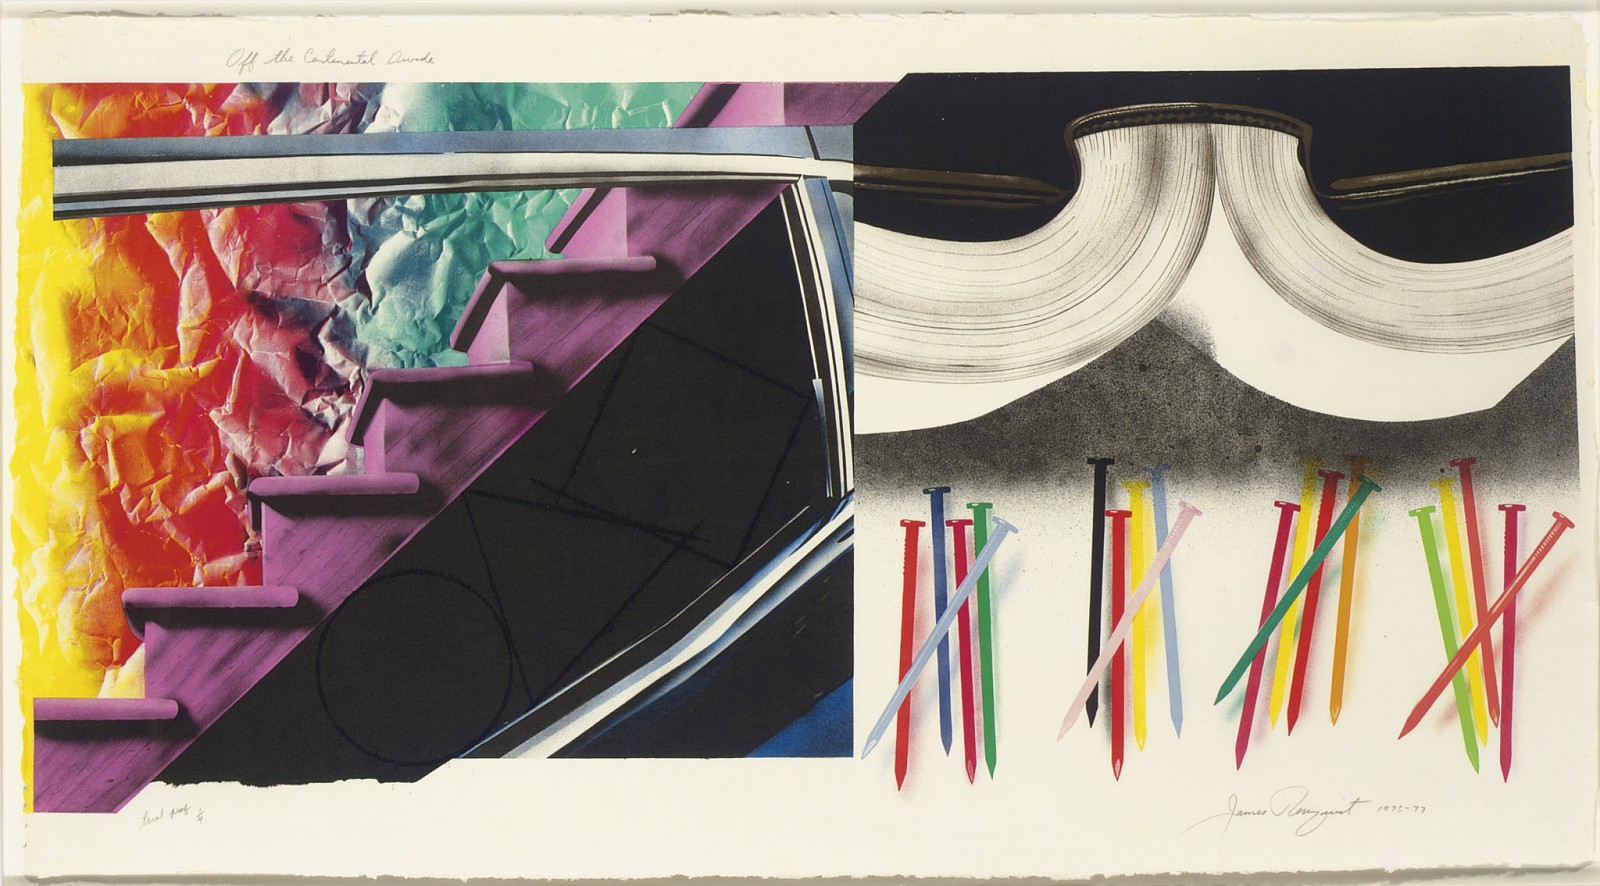 James Rosenquist, Off the Continental Divide, 1973
Lithograph, 42 x 78 inches